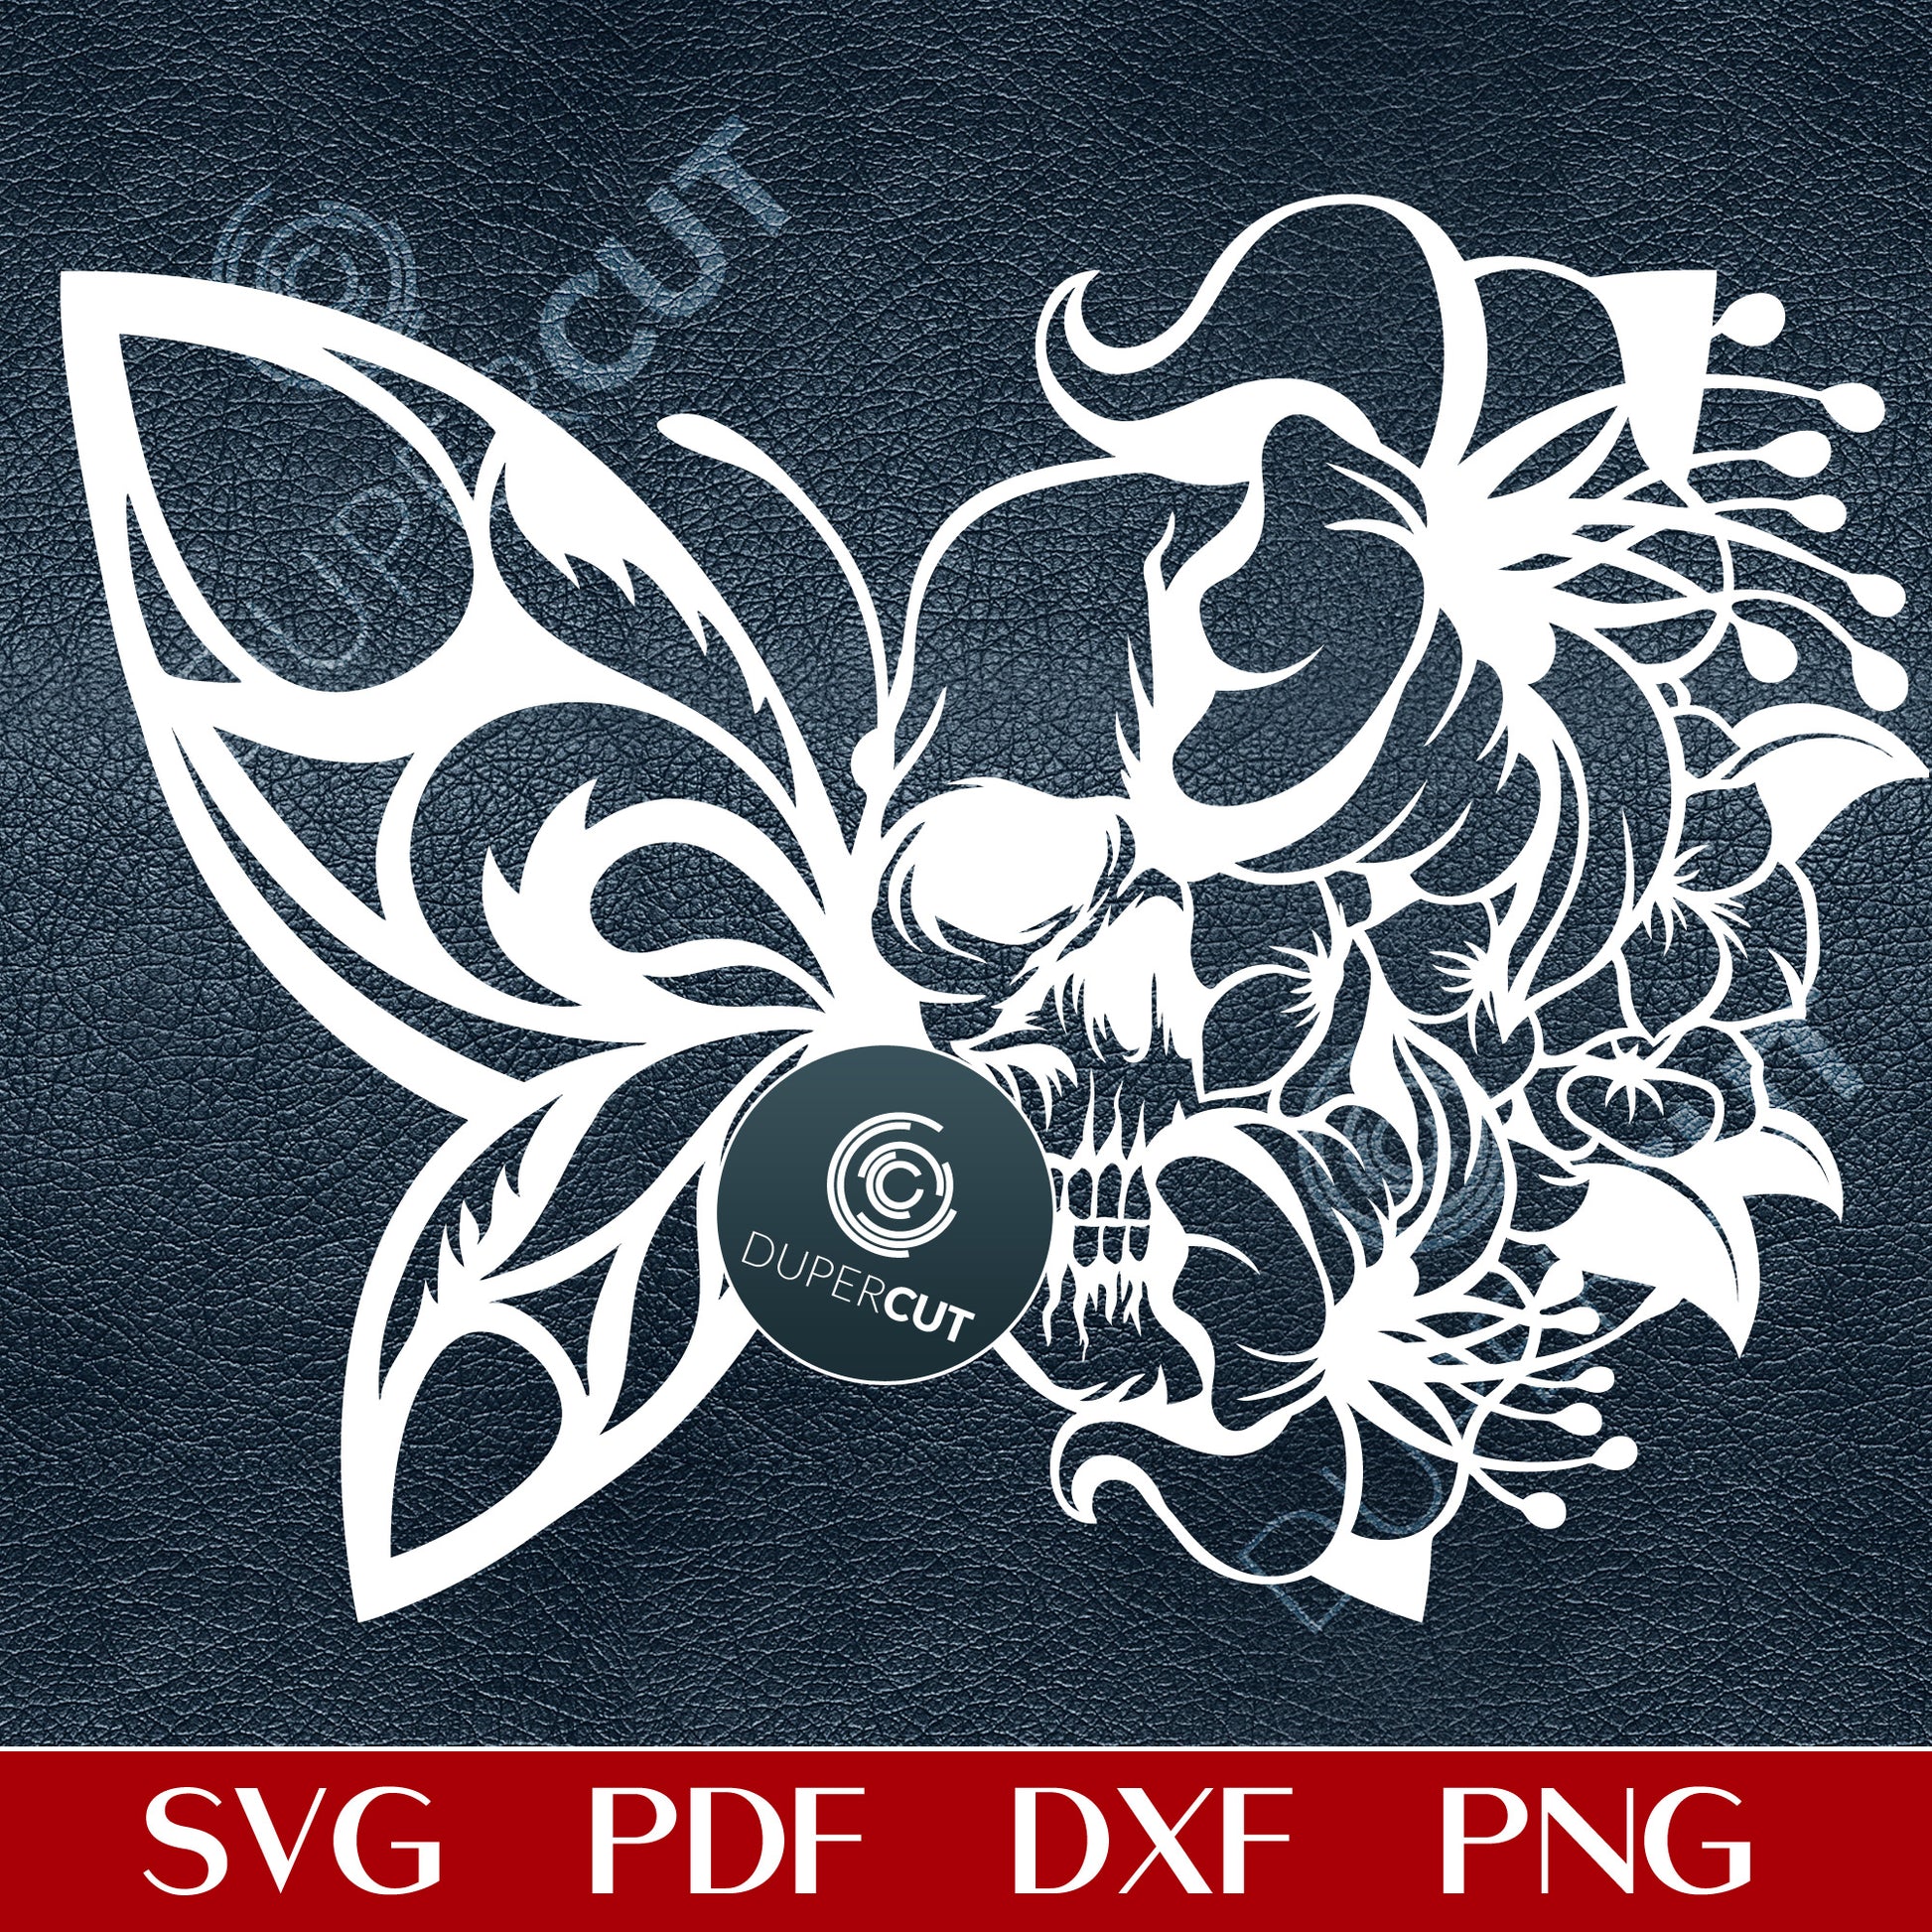 Floral Skull Half butterfly - paper cutting template - SVG DXF PNG vector files for laser cutting and engraving. For use with Glowforge, Cricut, Silhouette, CNC plasma machines